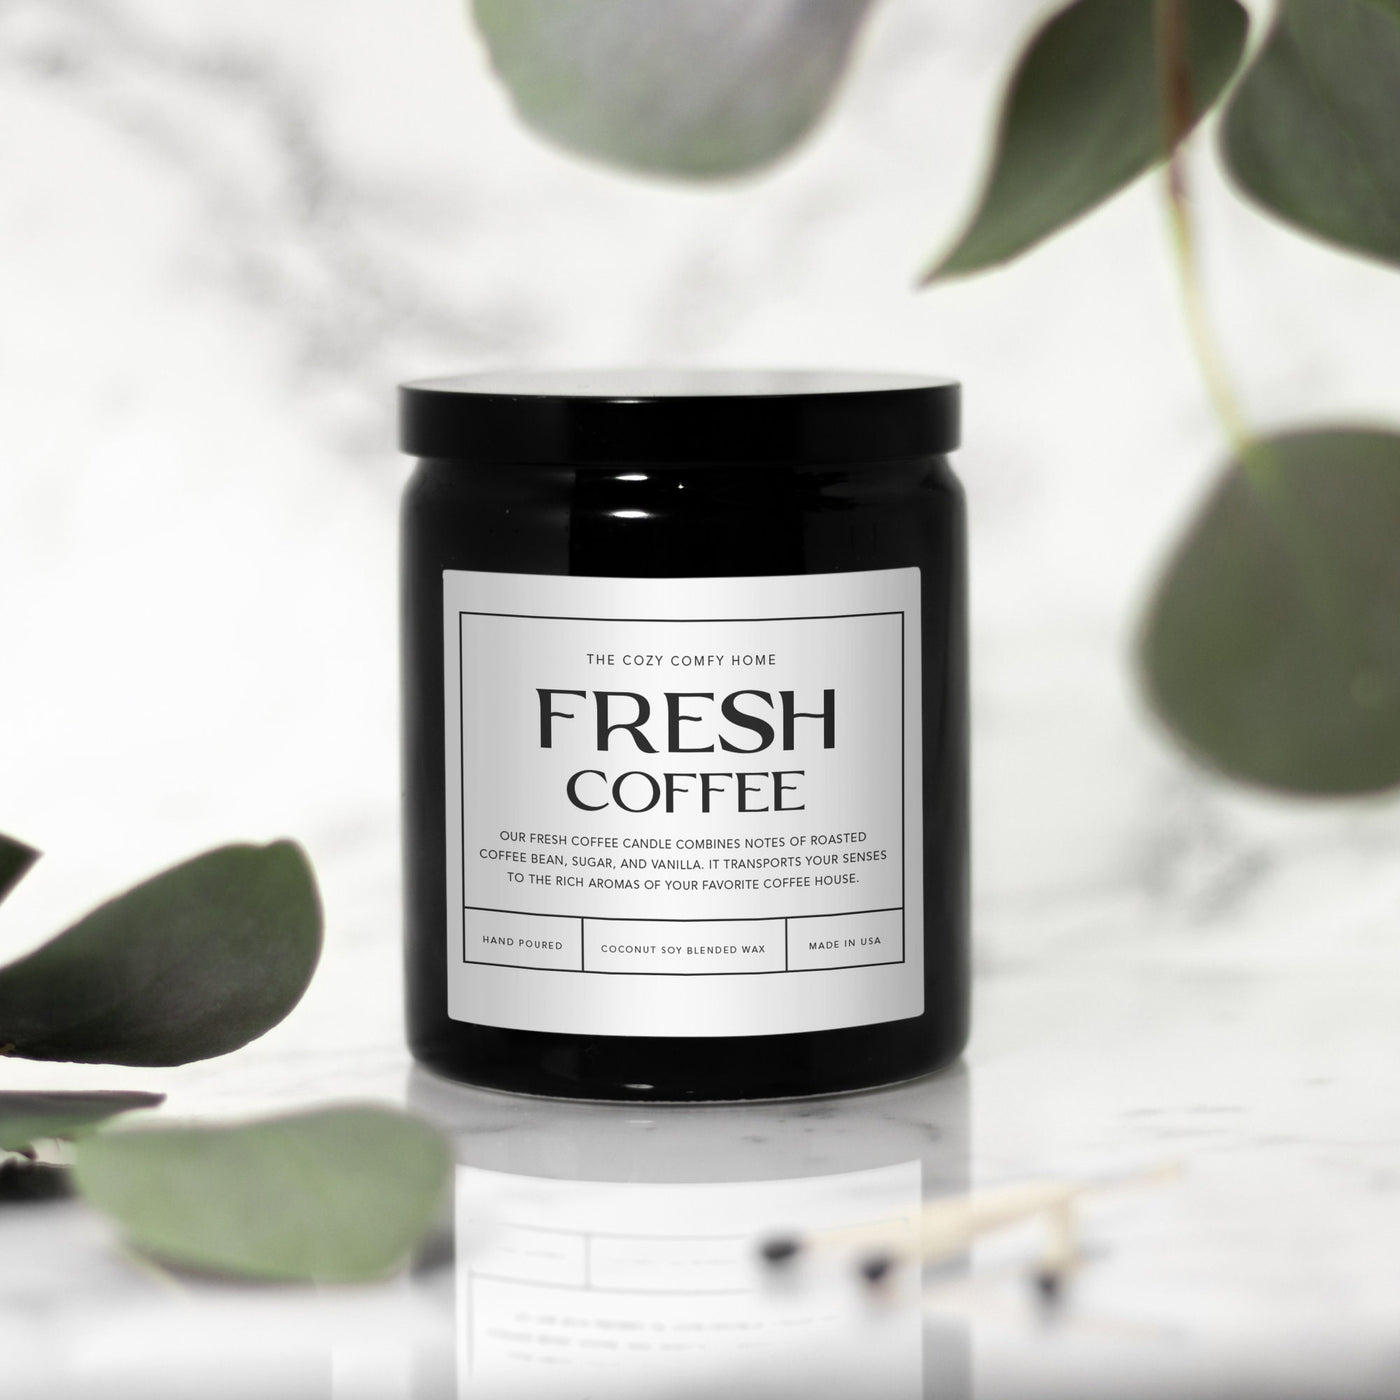 Fresh Coffee hand poured candle, Scented Nontoxic Vegan Candle, 8 oz coconut soy wax tin candle, Black or White Ceramic Candle, Jar Candle